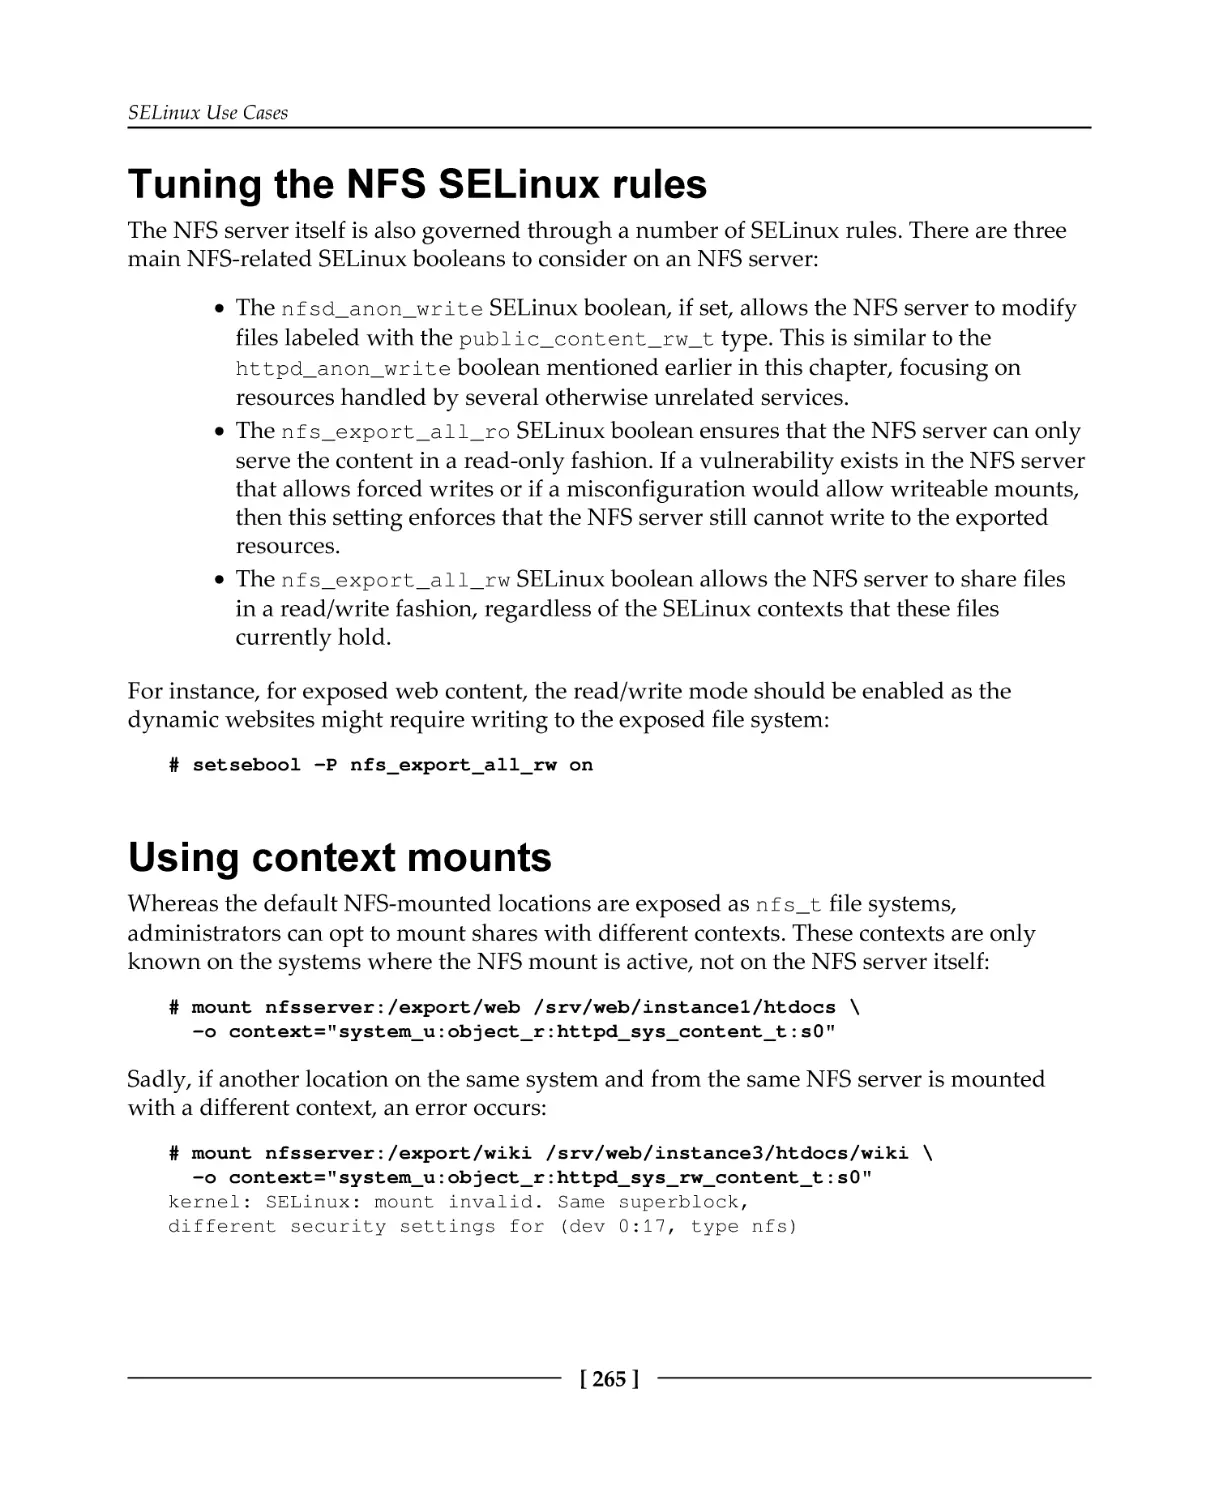 Tuning the NFS SELinux rules
Using context mounts